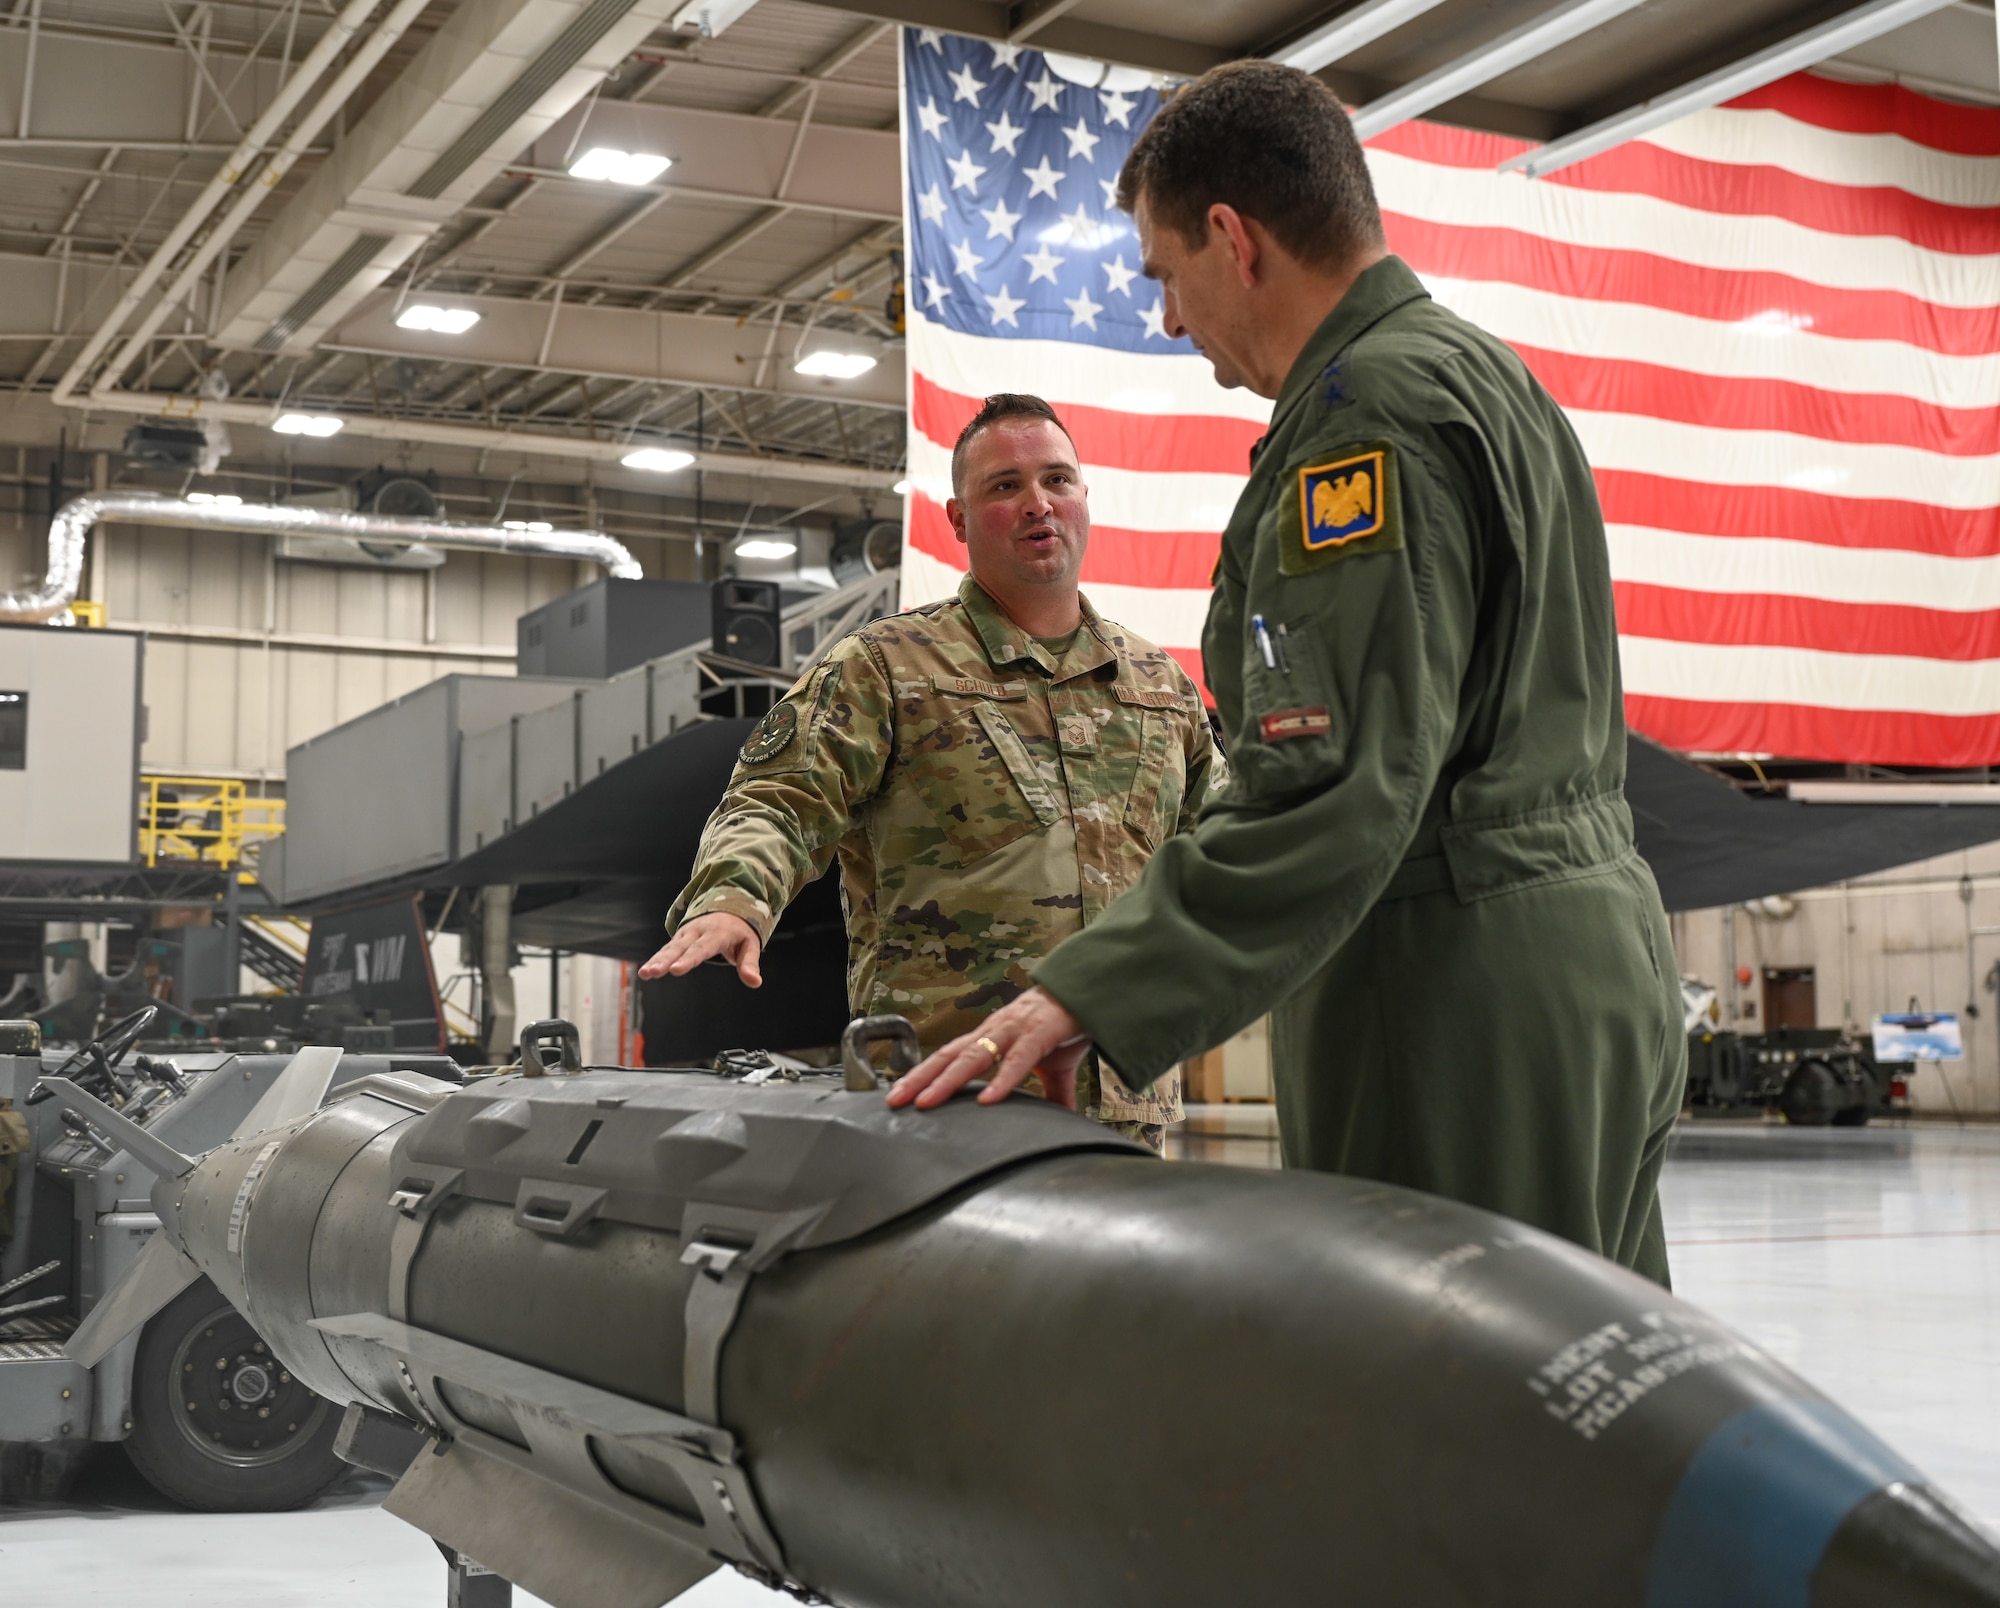 U.S. Air Force Master Sgt. Brock Schuld, 131st Aircraft Maintenance Squadron 131st Bomb Wing, Missouri National Guard, speaks with Lt. Gen. Michael Loh, director, Air National Guard, at the Whiteman Air Force Base, Missouri, Weapons Load Trainer, May 13, 2022. The trainer allows Team Whiteman Airmen to learn all aspects of the munitions enterprise for the B-2 Spirit bomber in a safe and controlled environment. (U.S. Air Force photo by Airman 1st Class Bryson Britt)